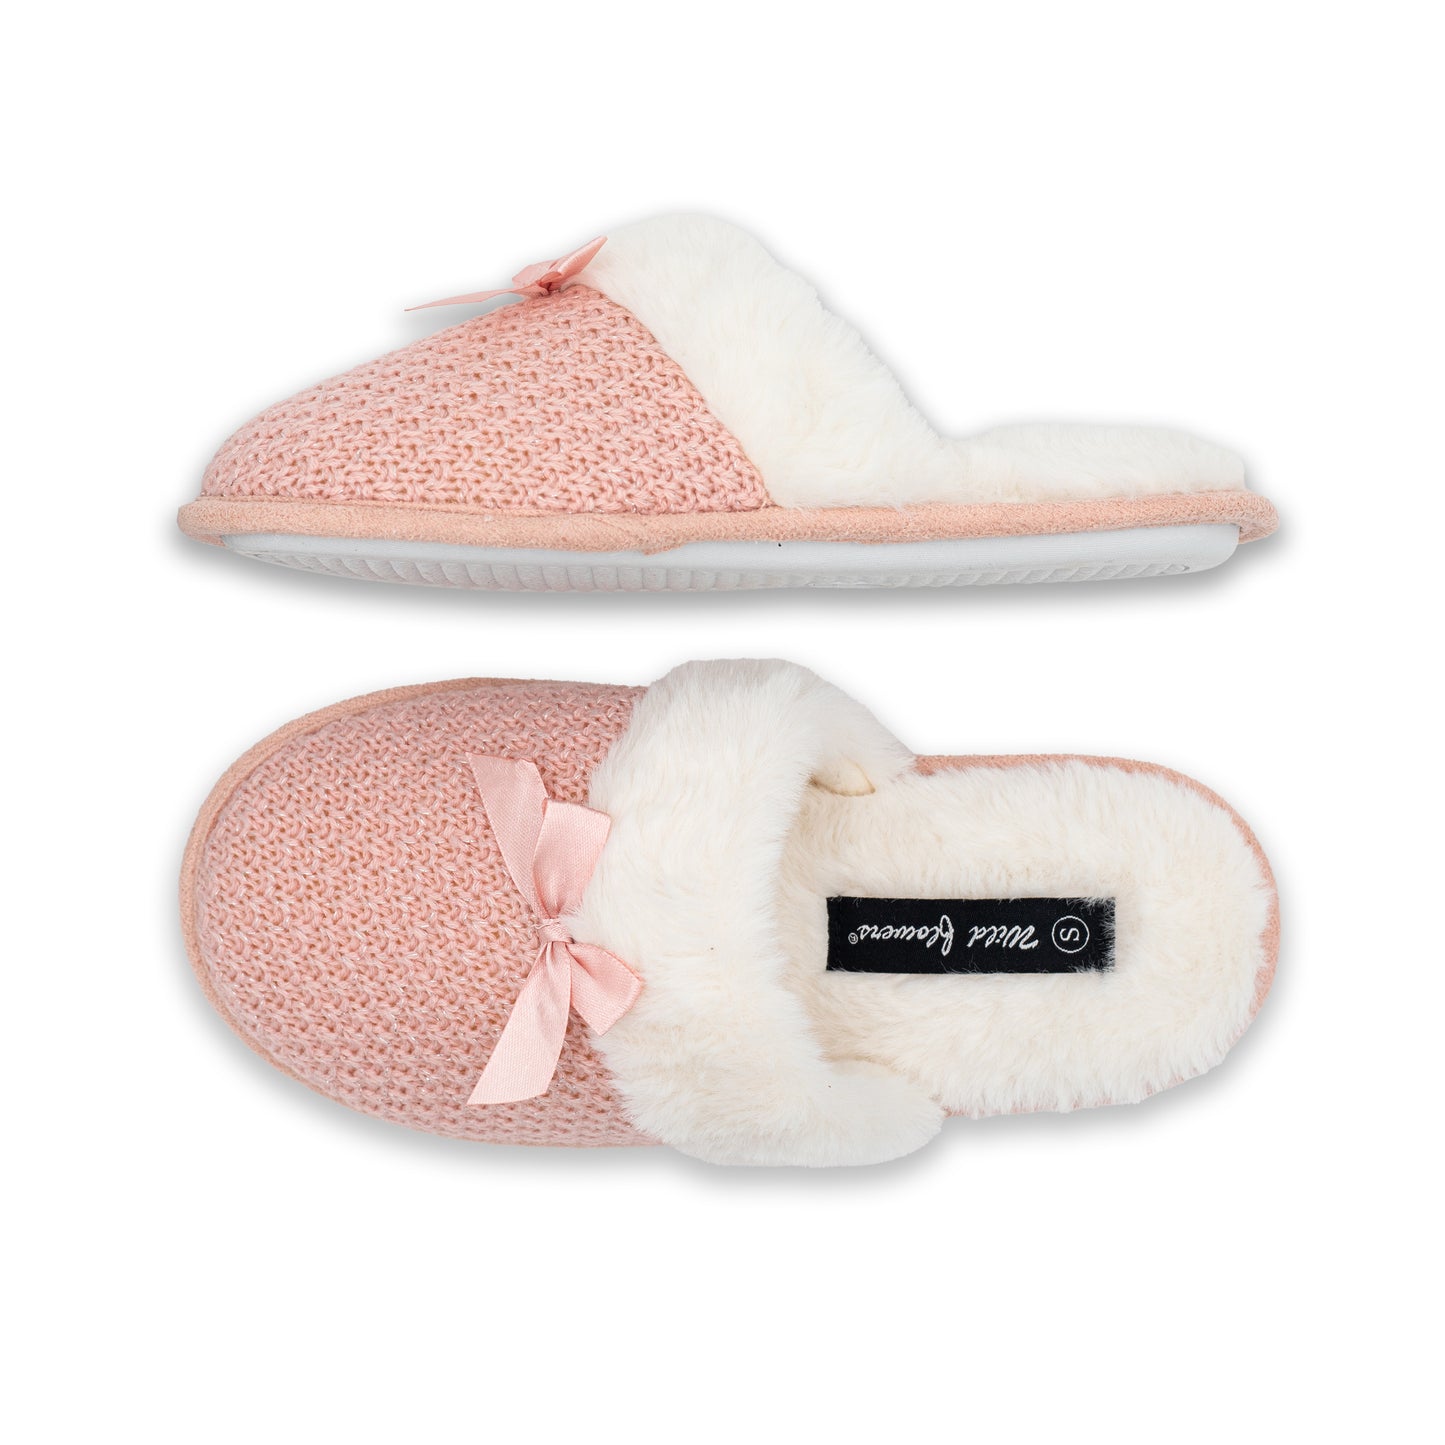 Ladies Fur Lined Slippers with Bow